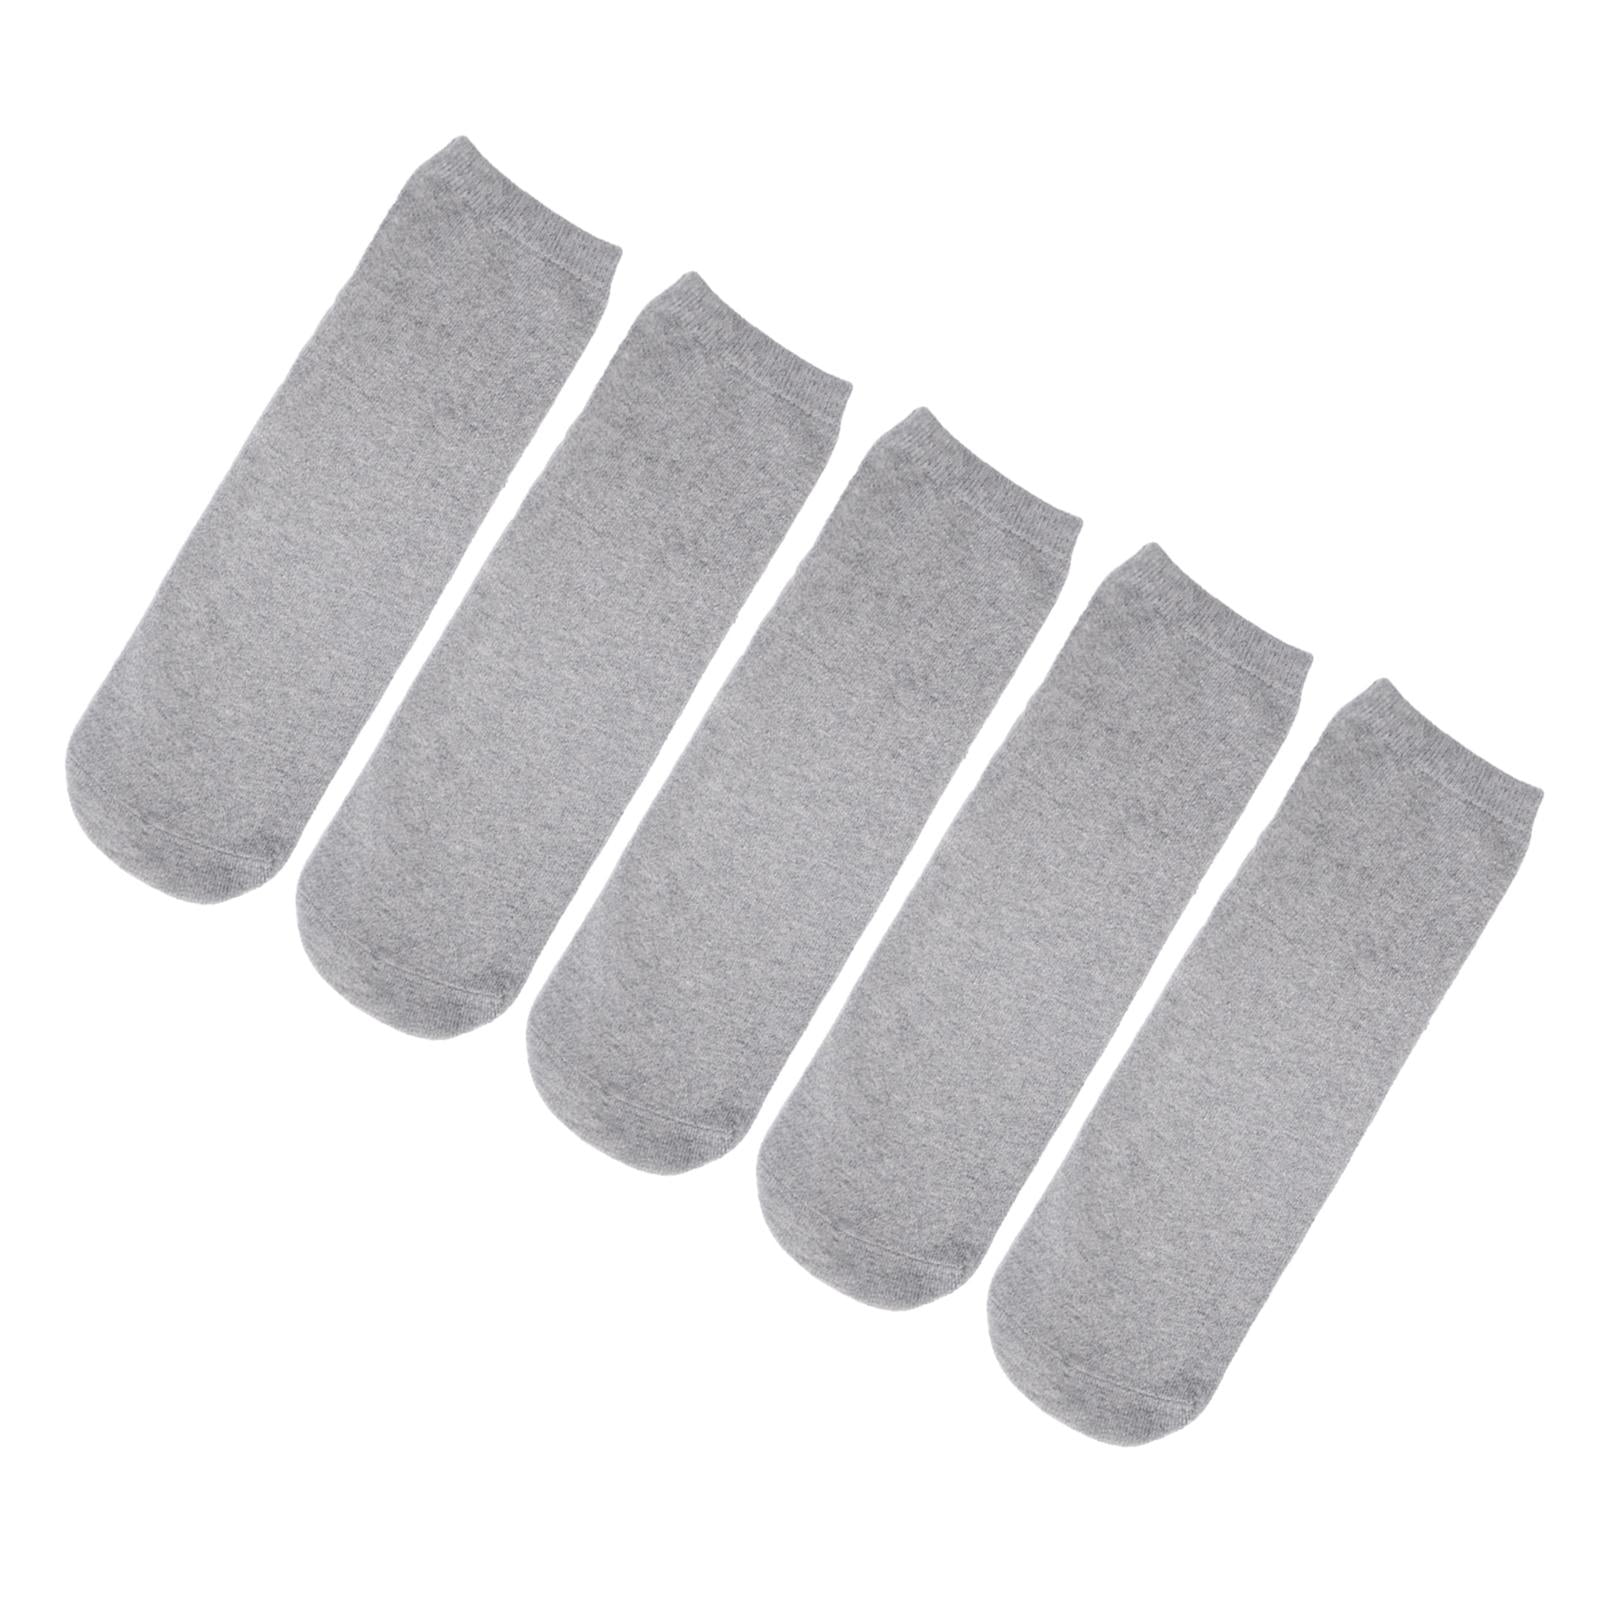 5 Pieces Stump Socks Partial Foot Amputation Cotton Amputee Socks for ...